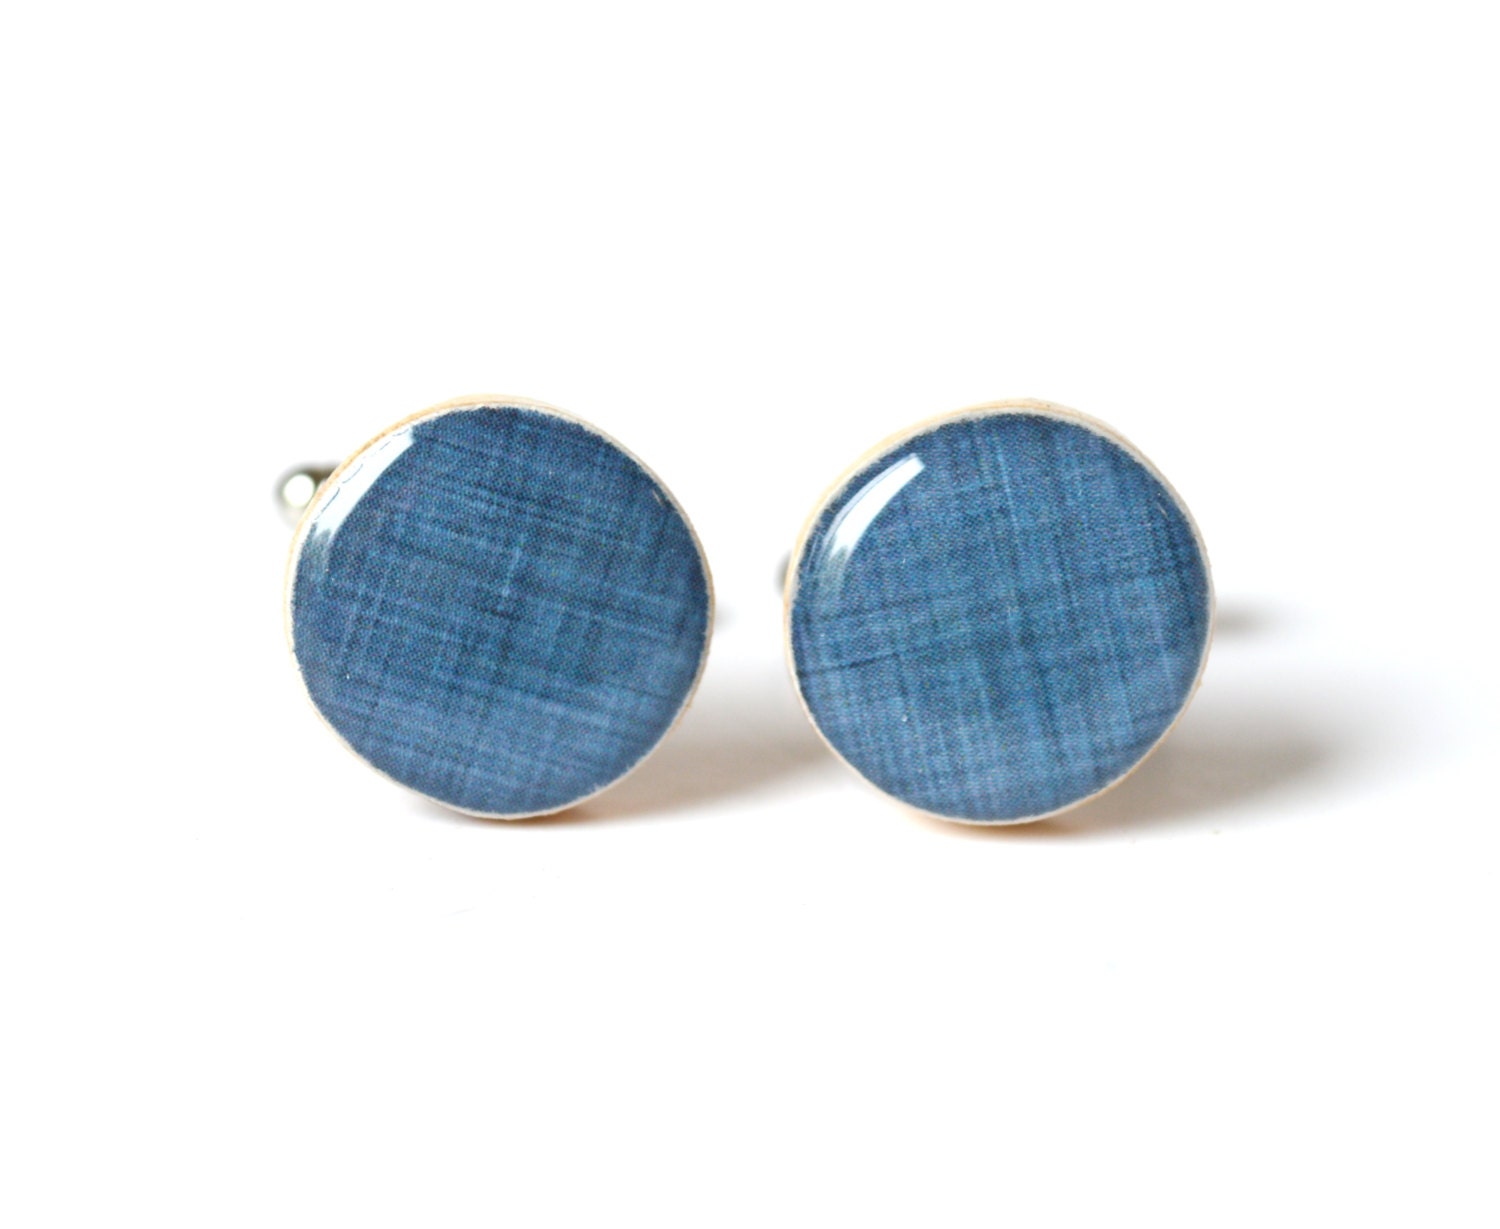 Denim blue cufflinks wood cuff links fathers day gift for dad wedding eco friendly mens accessory gift for men - starlightwoods